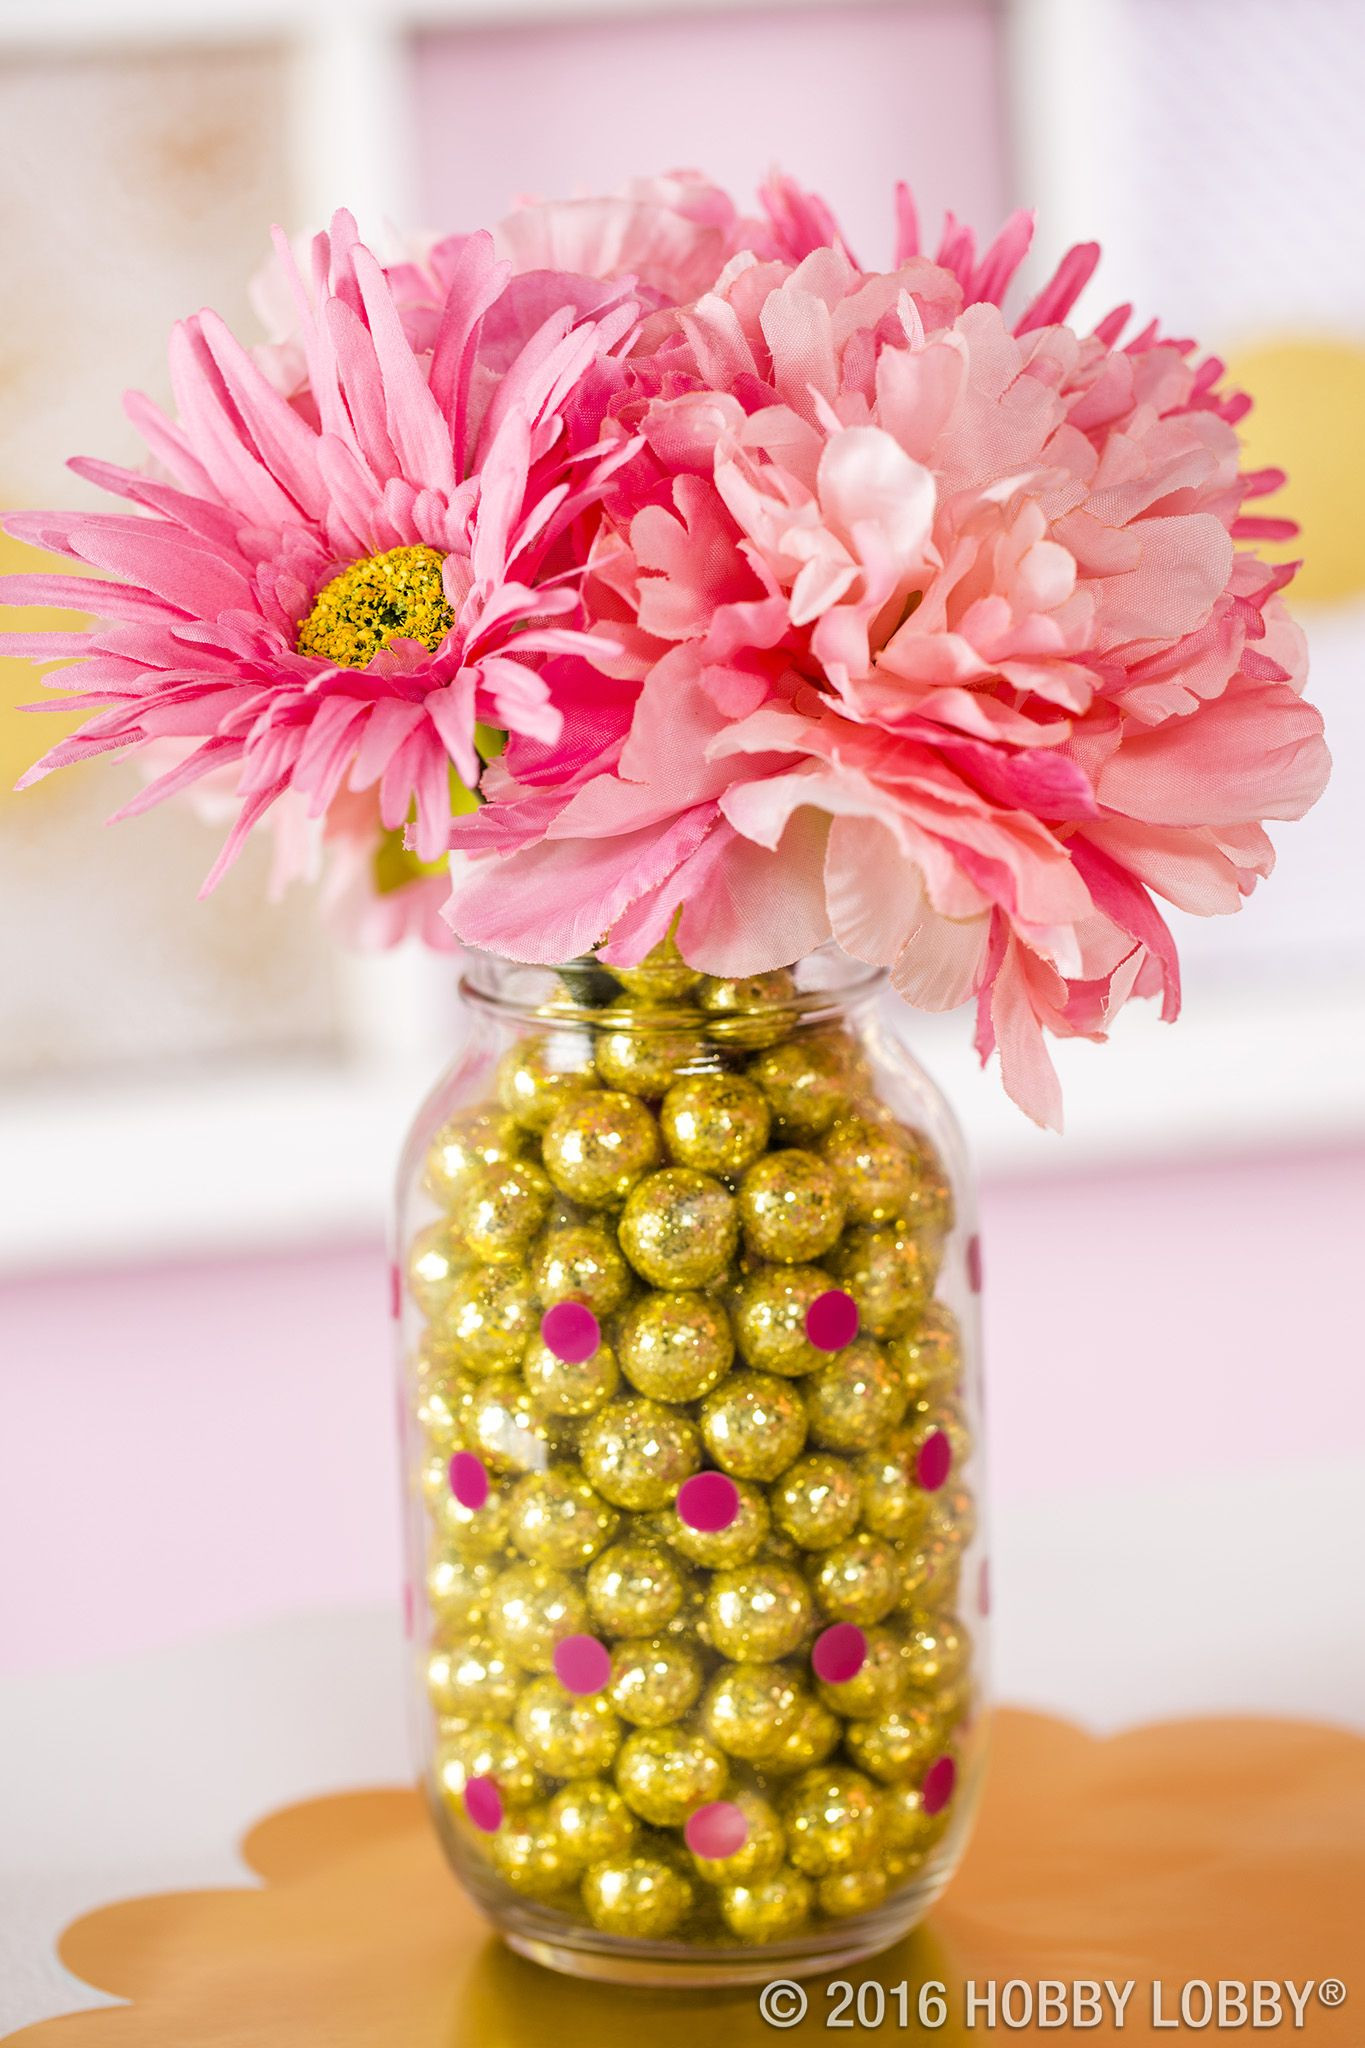 17 Popular Hobby Lobby Vases On Sale 2024 free download hobby lobby vases on sale of a dash of gold and a splash of pink this will be a party to throughout jars vases decor pillows home decor frames hobby lobby